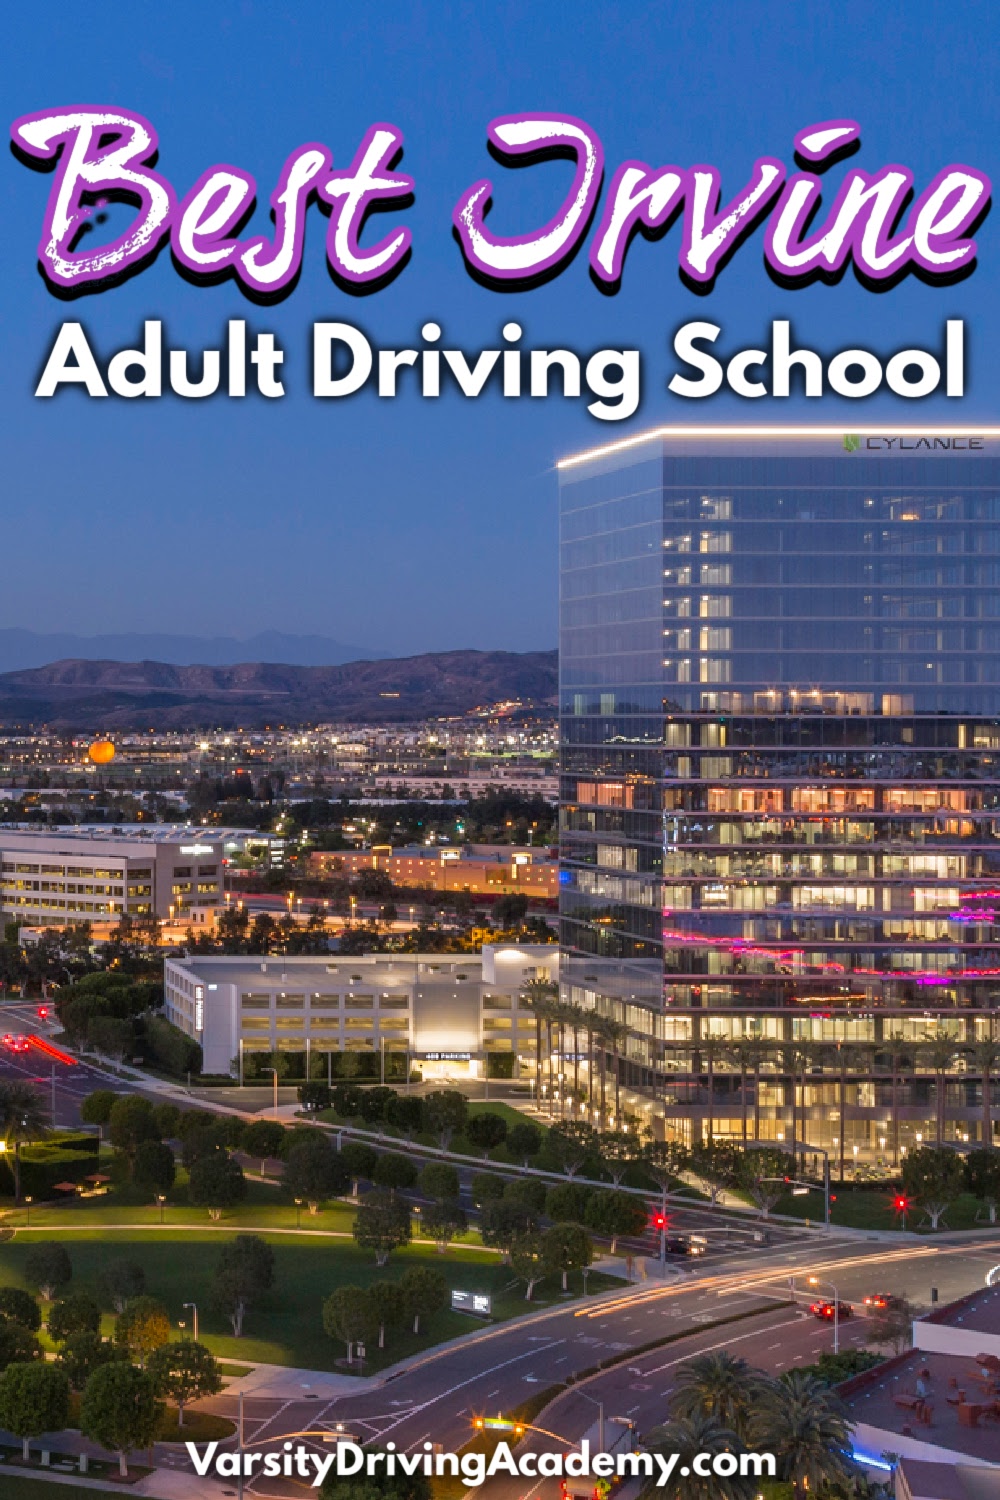 Varsity Driving Academy offers the best Irvine adult driving school services that help adults learn or relearn how to drive.